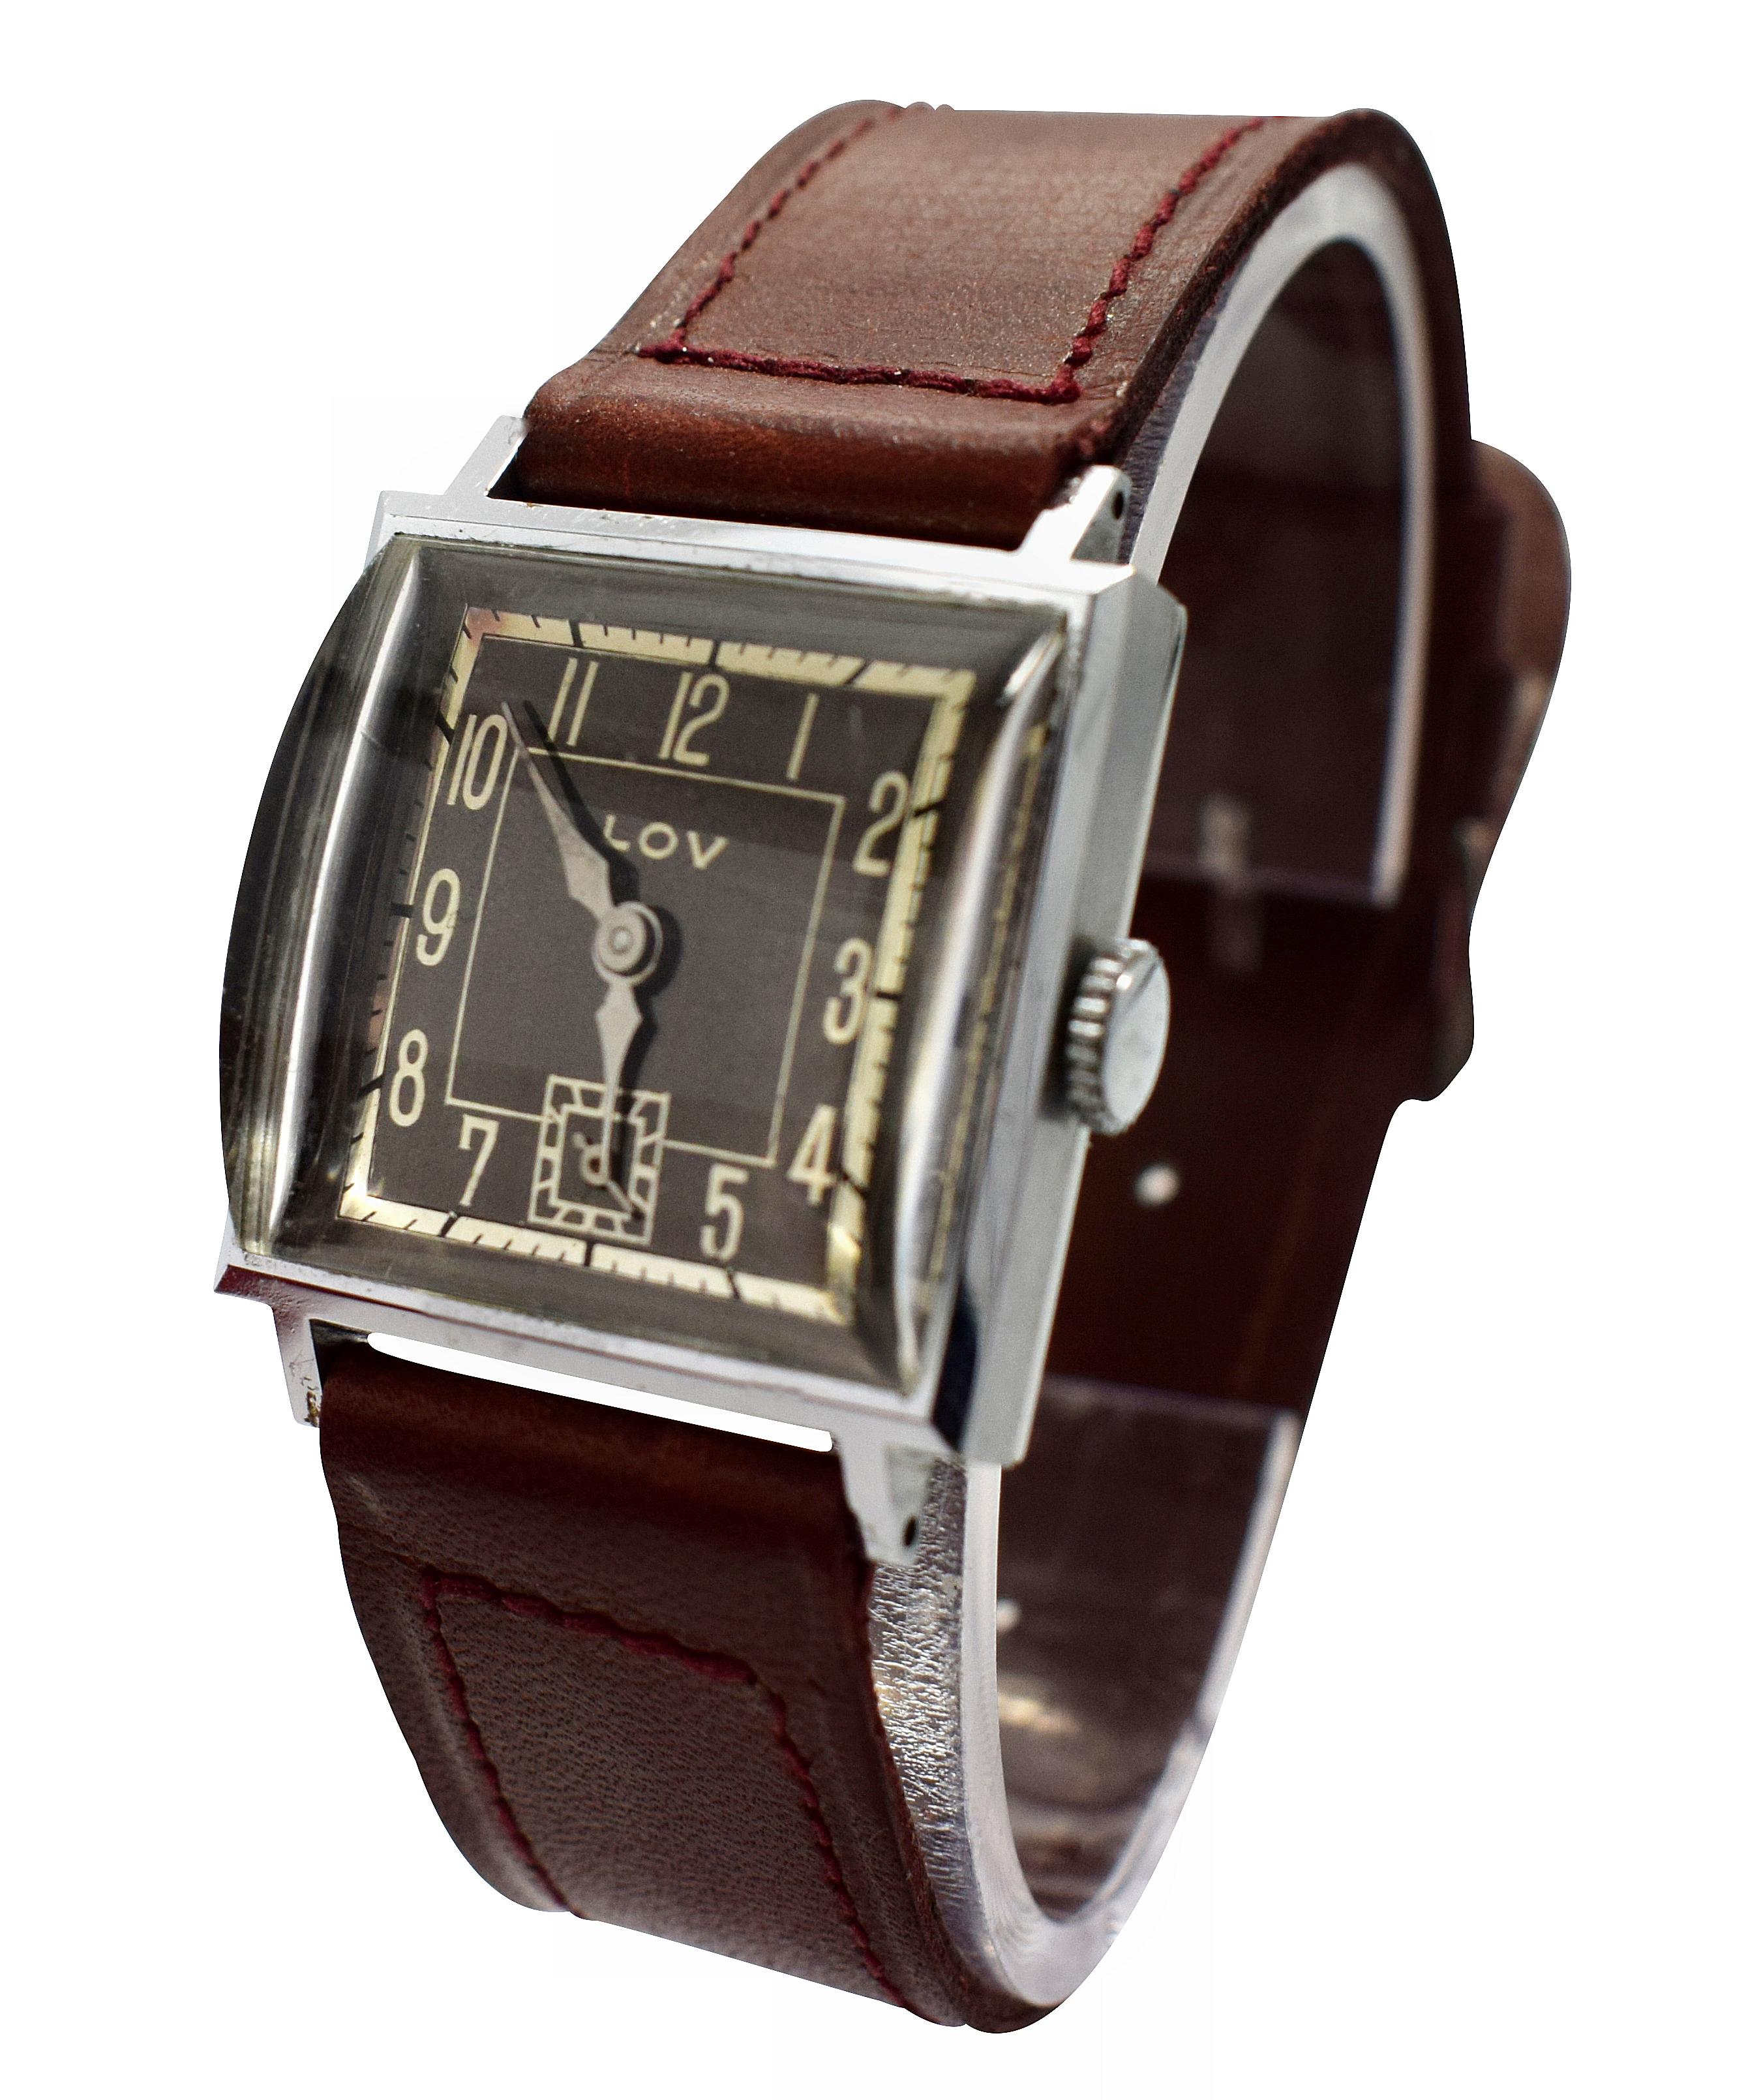 For those gents out there who desire a less than generic looking watch, who aspire for something not only classy but very distinctively Art Deco then this maybe the timepiece for you! This fabulous watch is Swiss made, dating to the late 30's with a